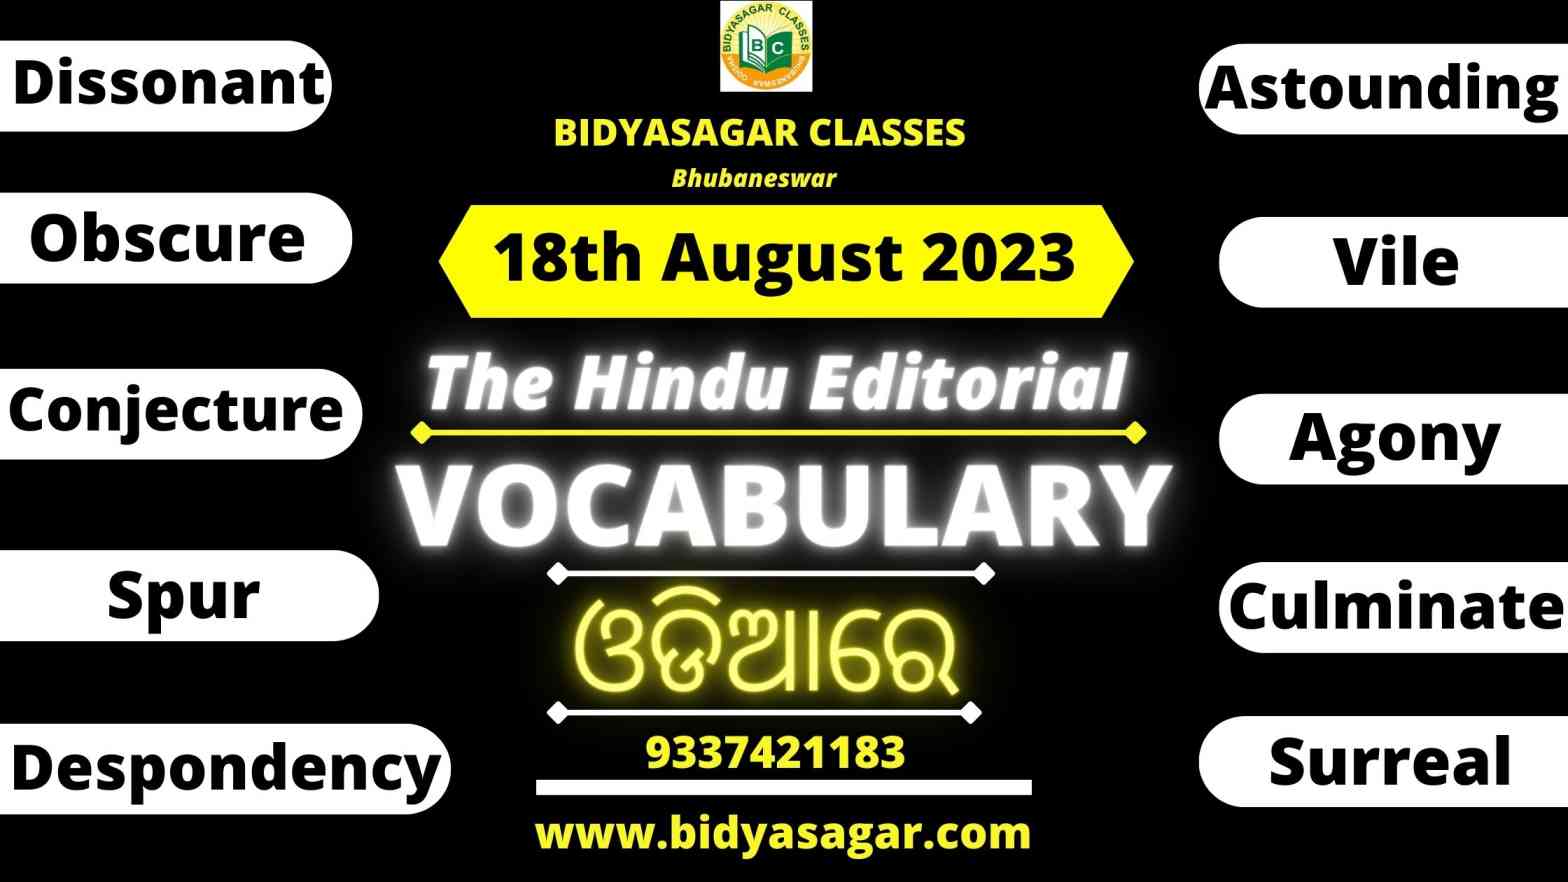 The Hindu Editorial Vocabulary of 18th August 2023